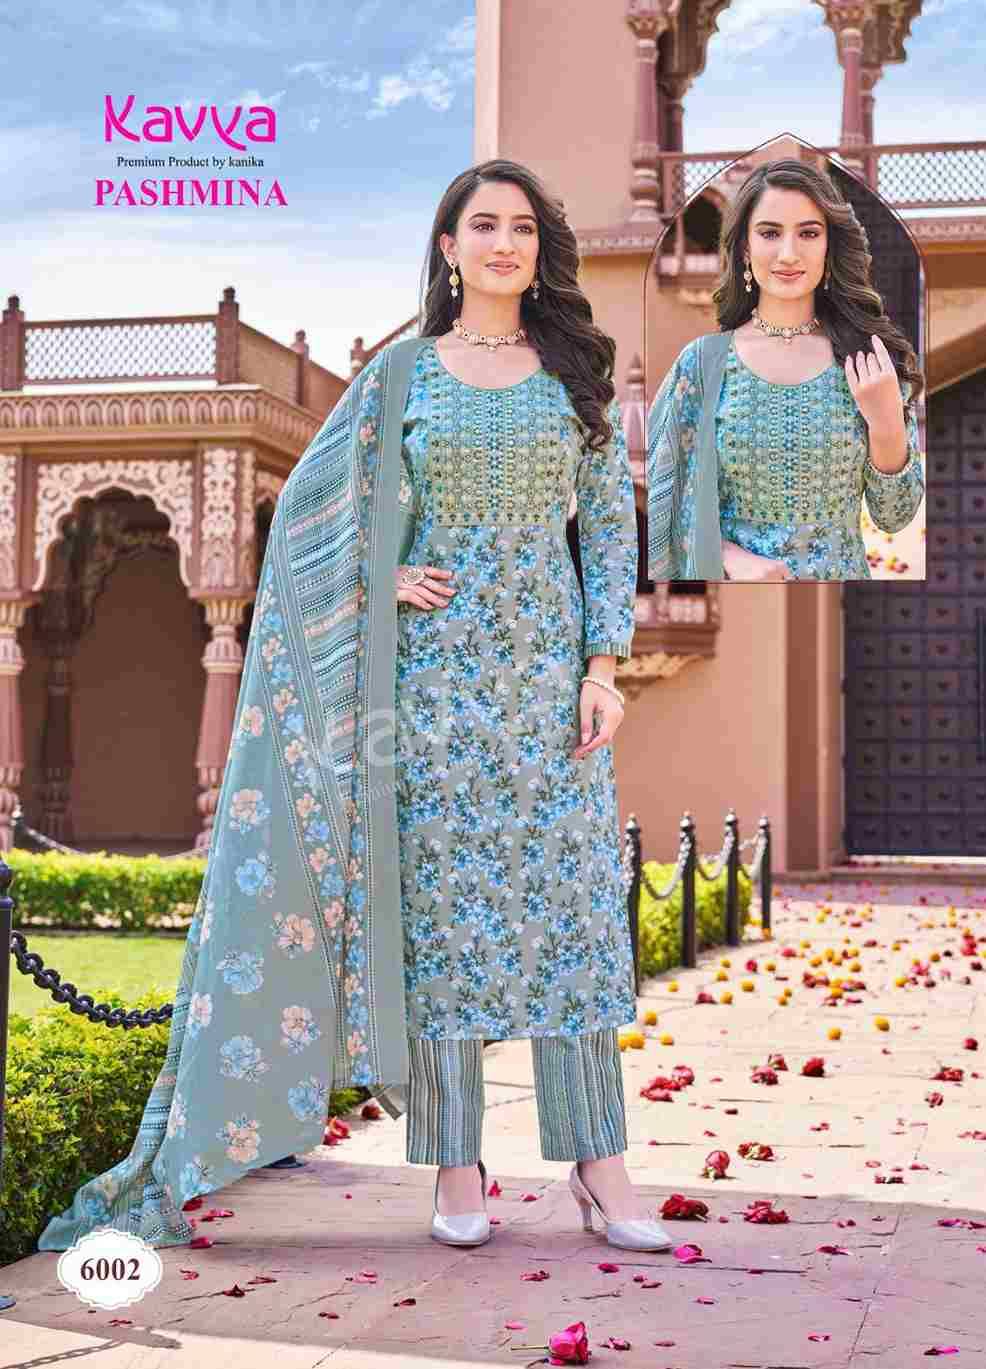 Pashmina Vol-6 By Kavya 6001 To 6010 Series Beautiful Stylish Festive Suits Fancy Colorful Casual Wear & Ethnic Wear & Ready To Wear Cotton Print Dresses At Wholesale Price